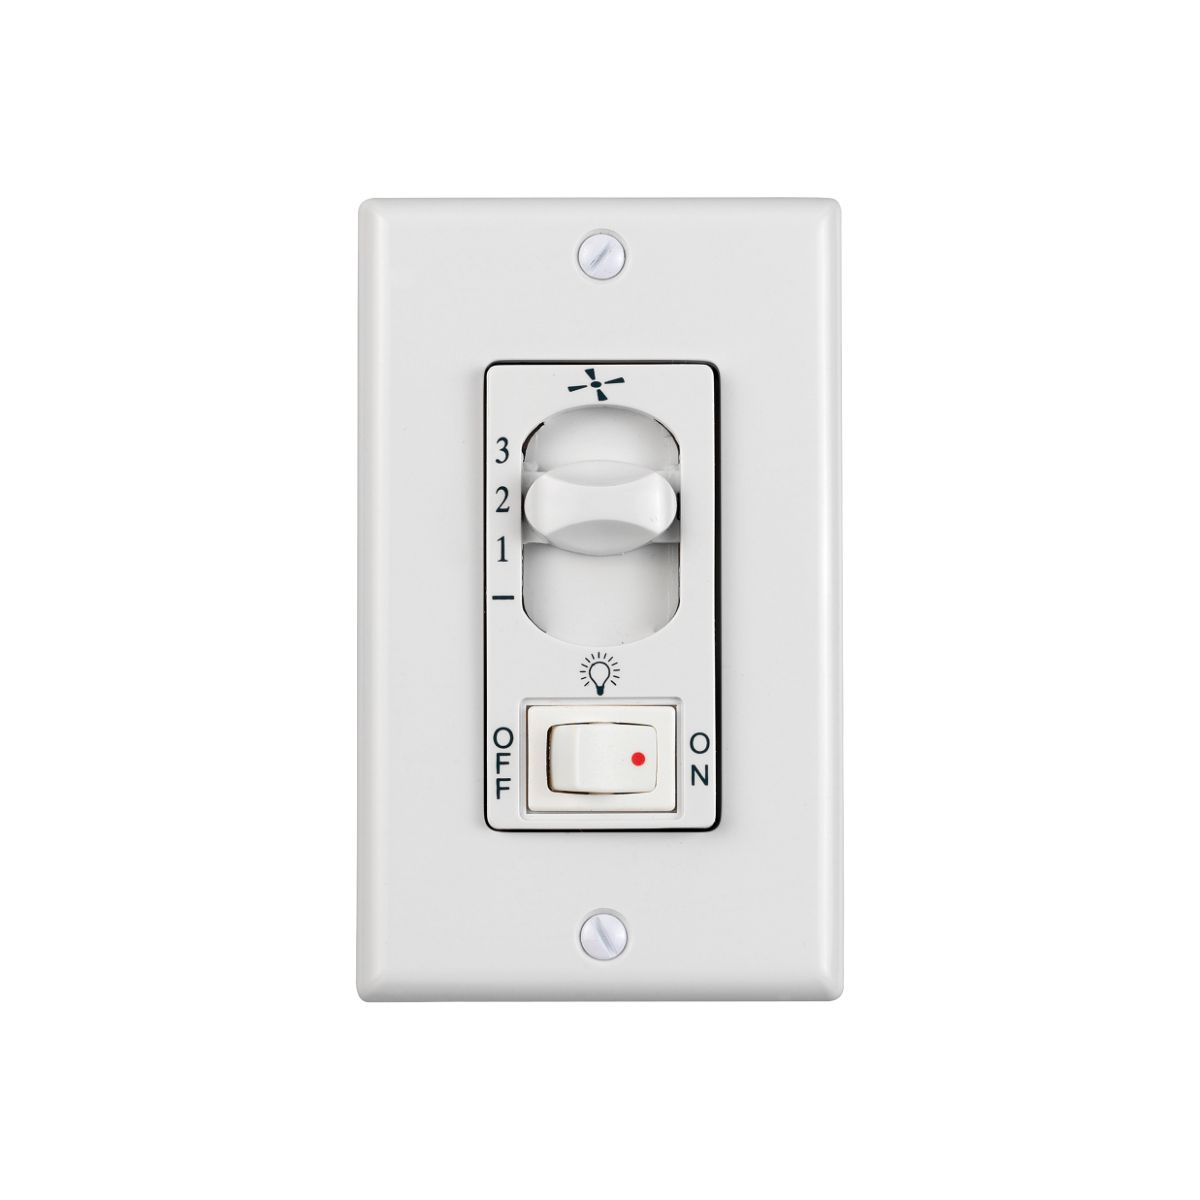 3 Speed Fan and Light Wall Control White